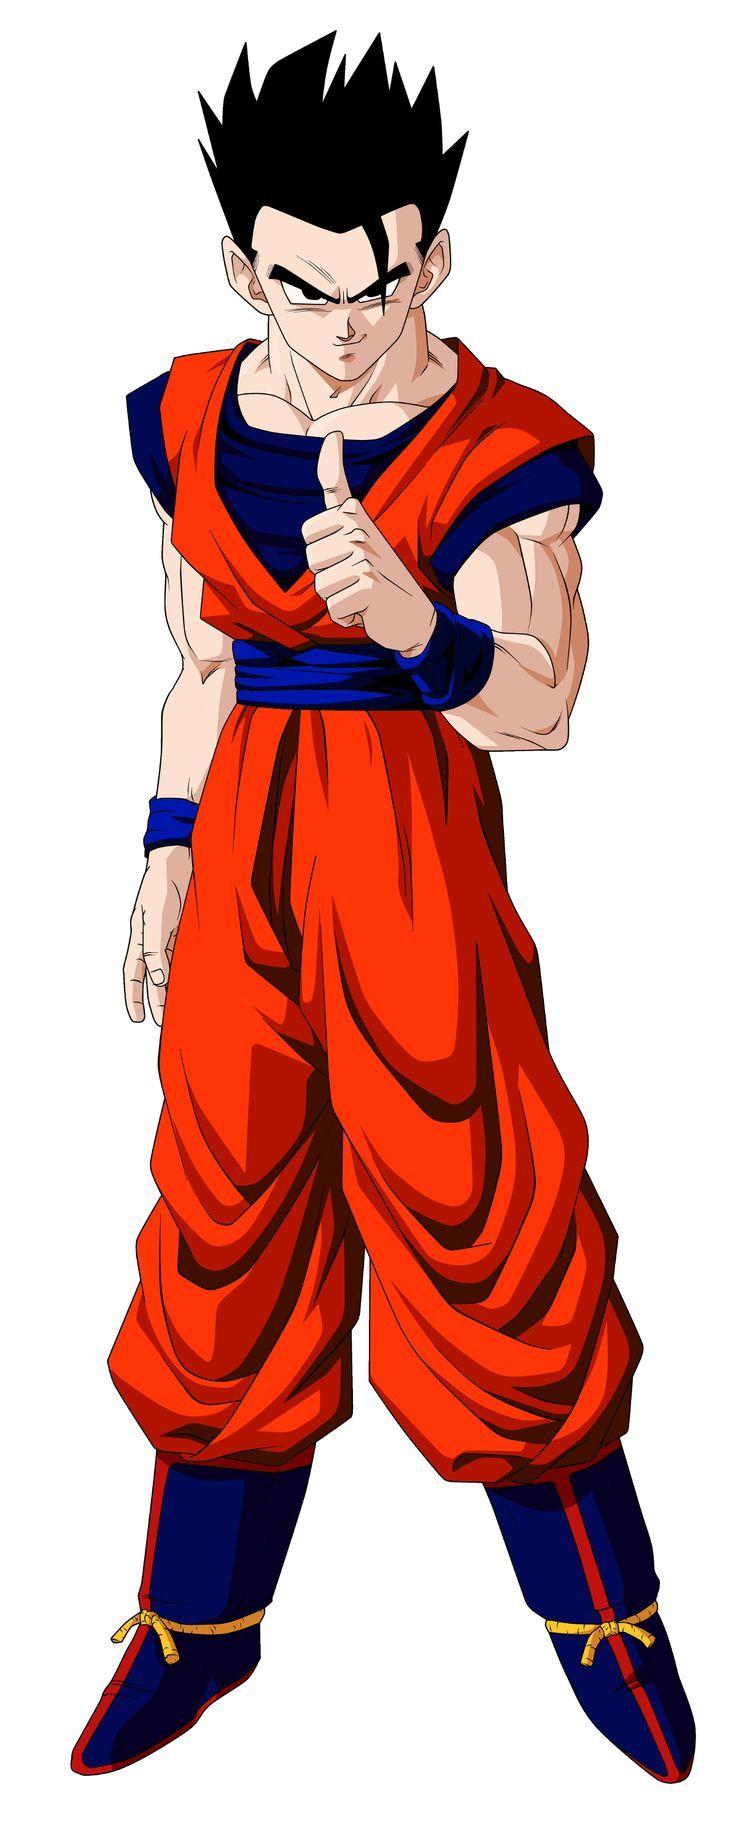 gohan-new-form-wallpapers-wallpaper-cave